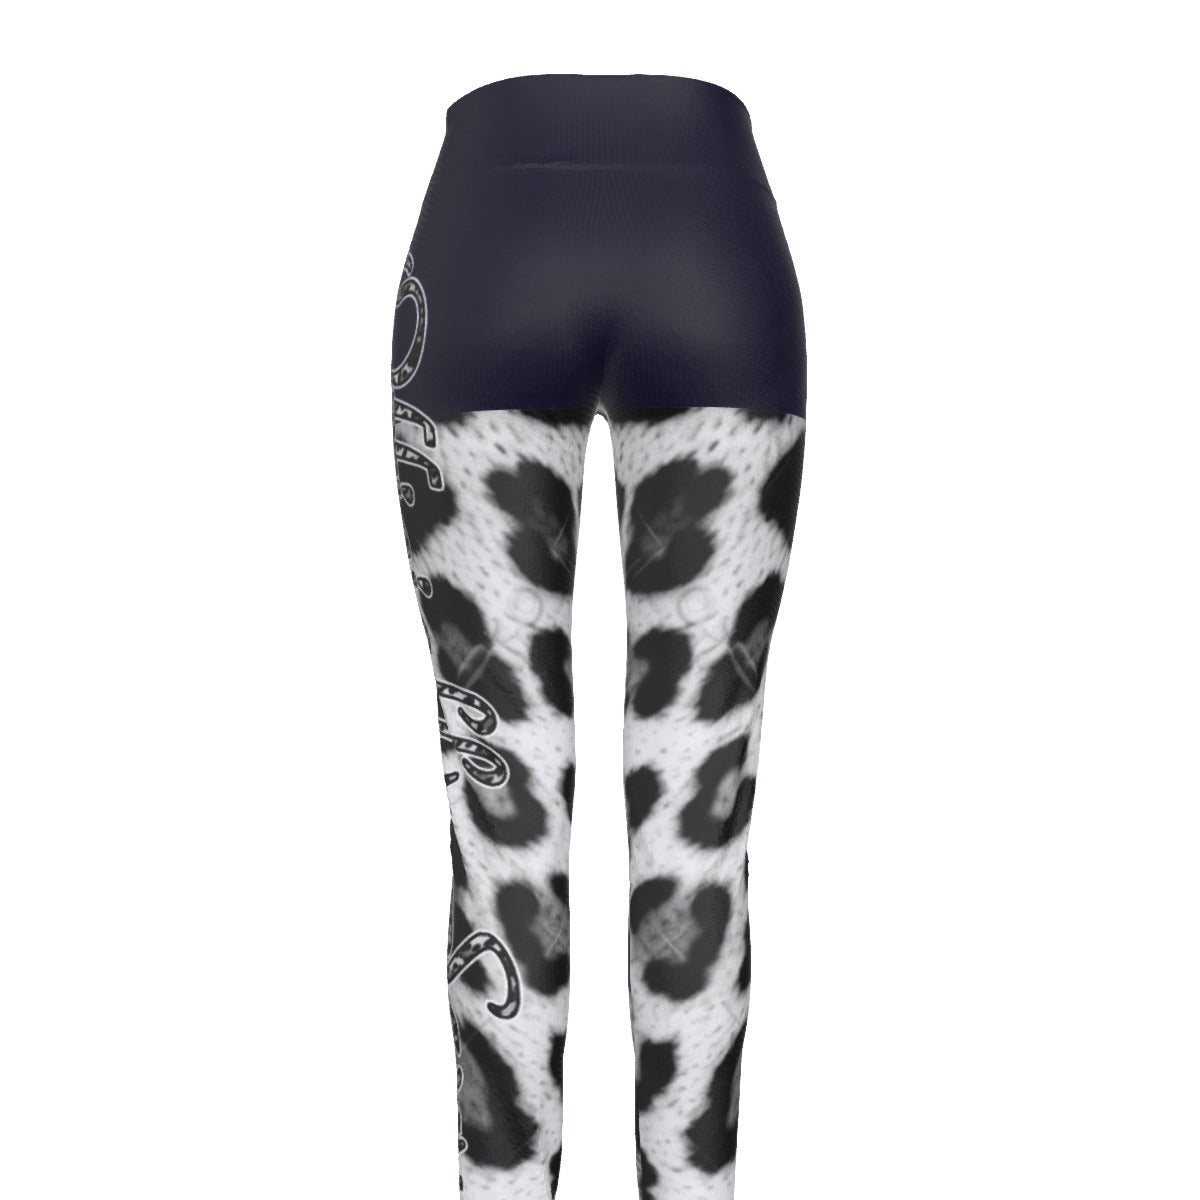 Officially Sexy Snow Leopard Print Collection Women's Black High Waist Booty Popper Leggings #2 (English) 3